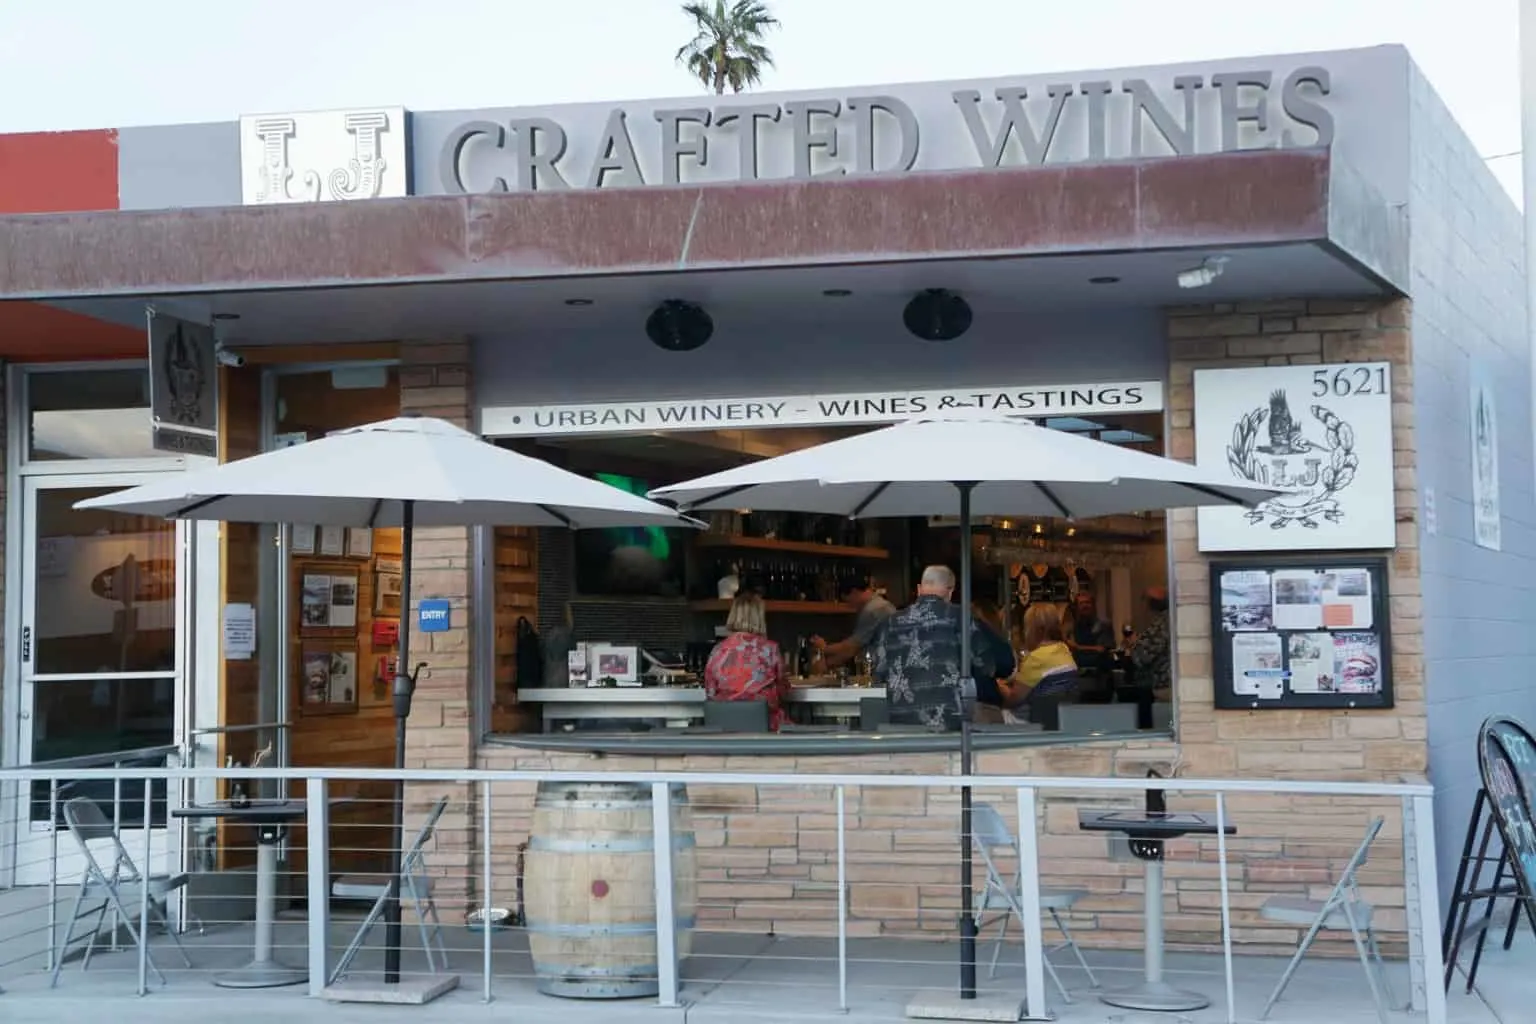 LJ Crafted Wines is one of over 20 San Diego urban wineries. You may not have heard of it because it's not downtown or in 